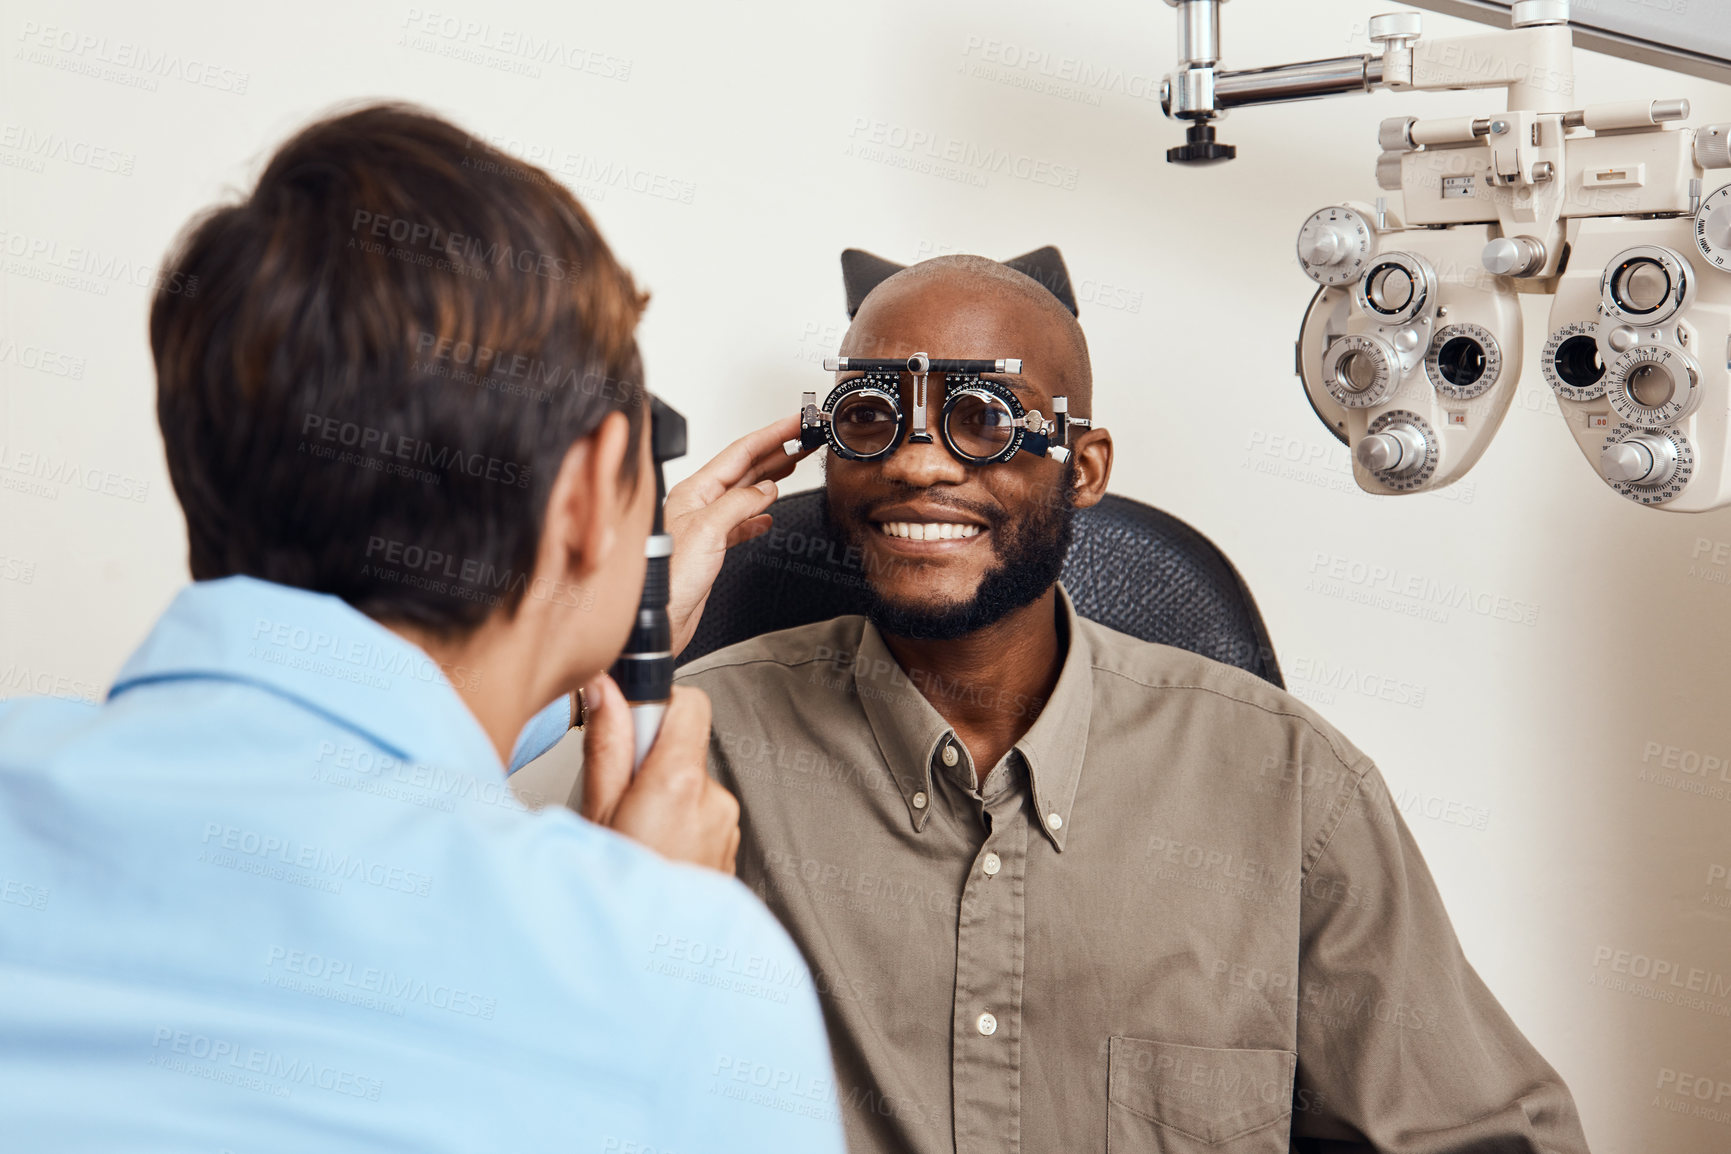 Buy stock photo Optical exam, optician or eye doctor at work testing vision or sight of patient at optometrist. Happy, smiling young man checking his eyes for glasses or treatment at an ophthalmologist in a clinic.